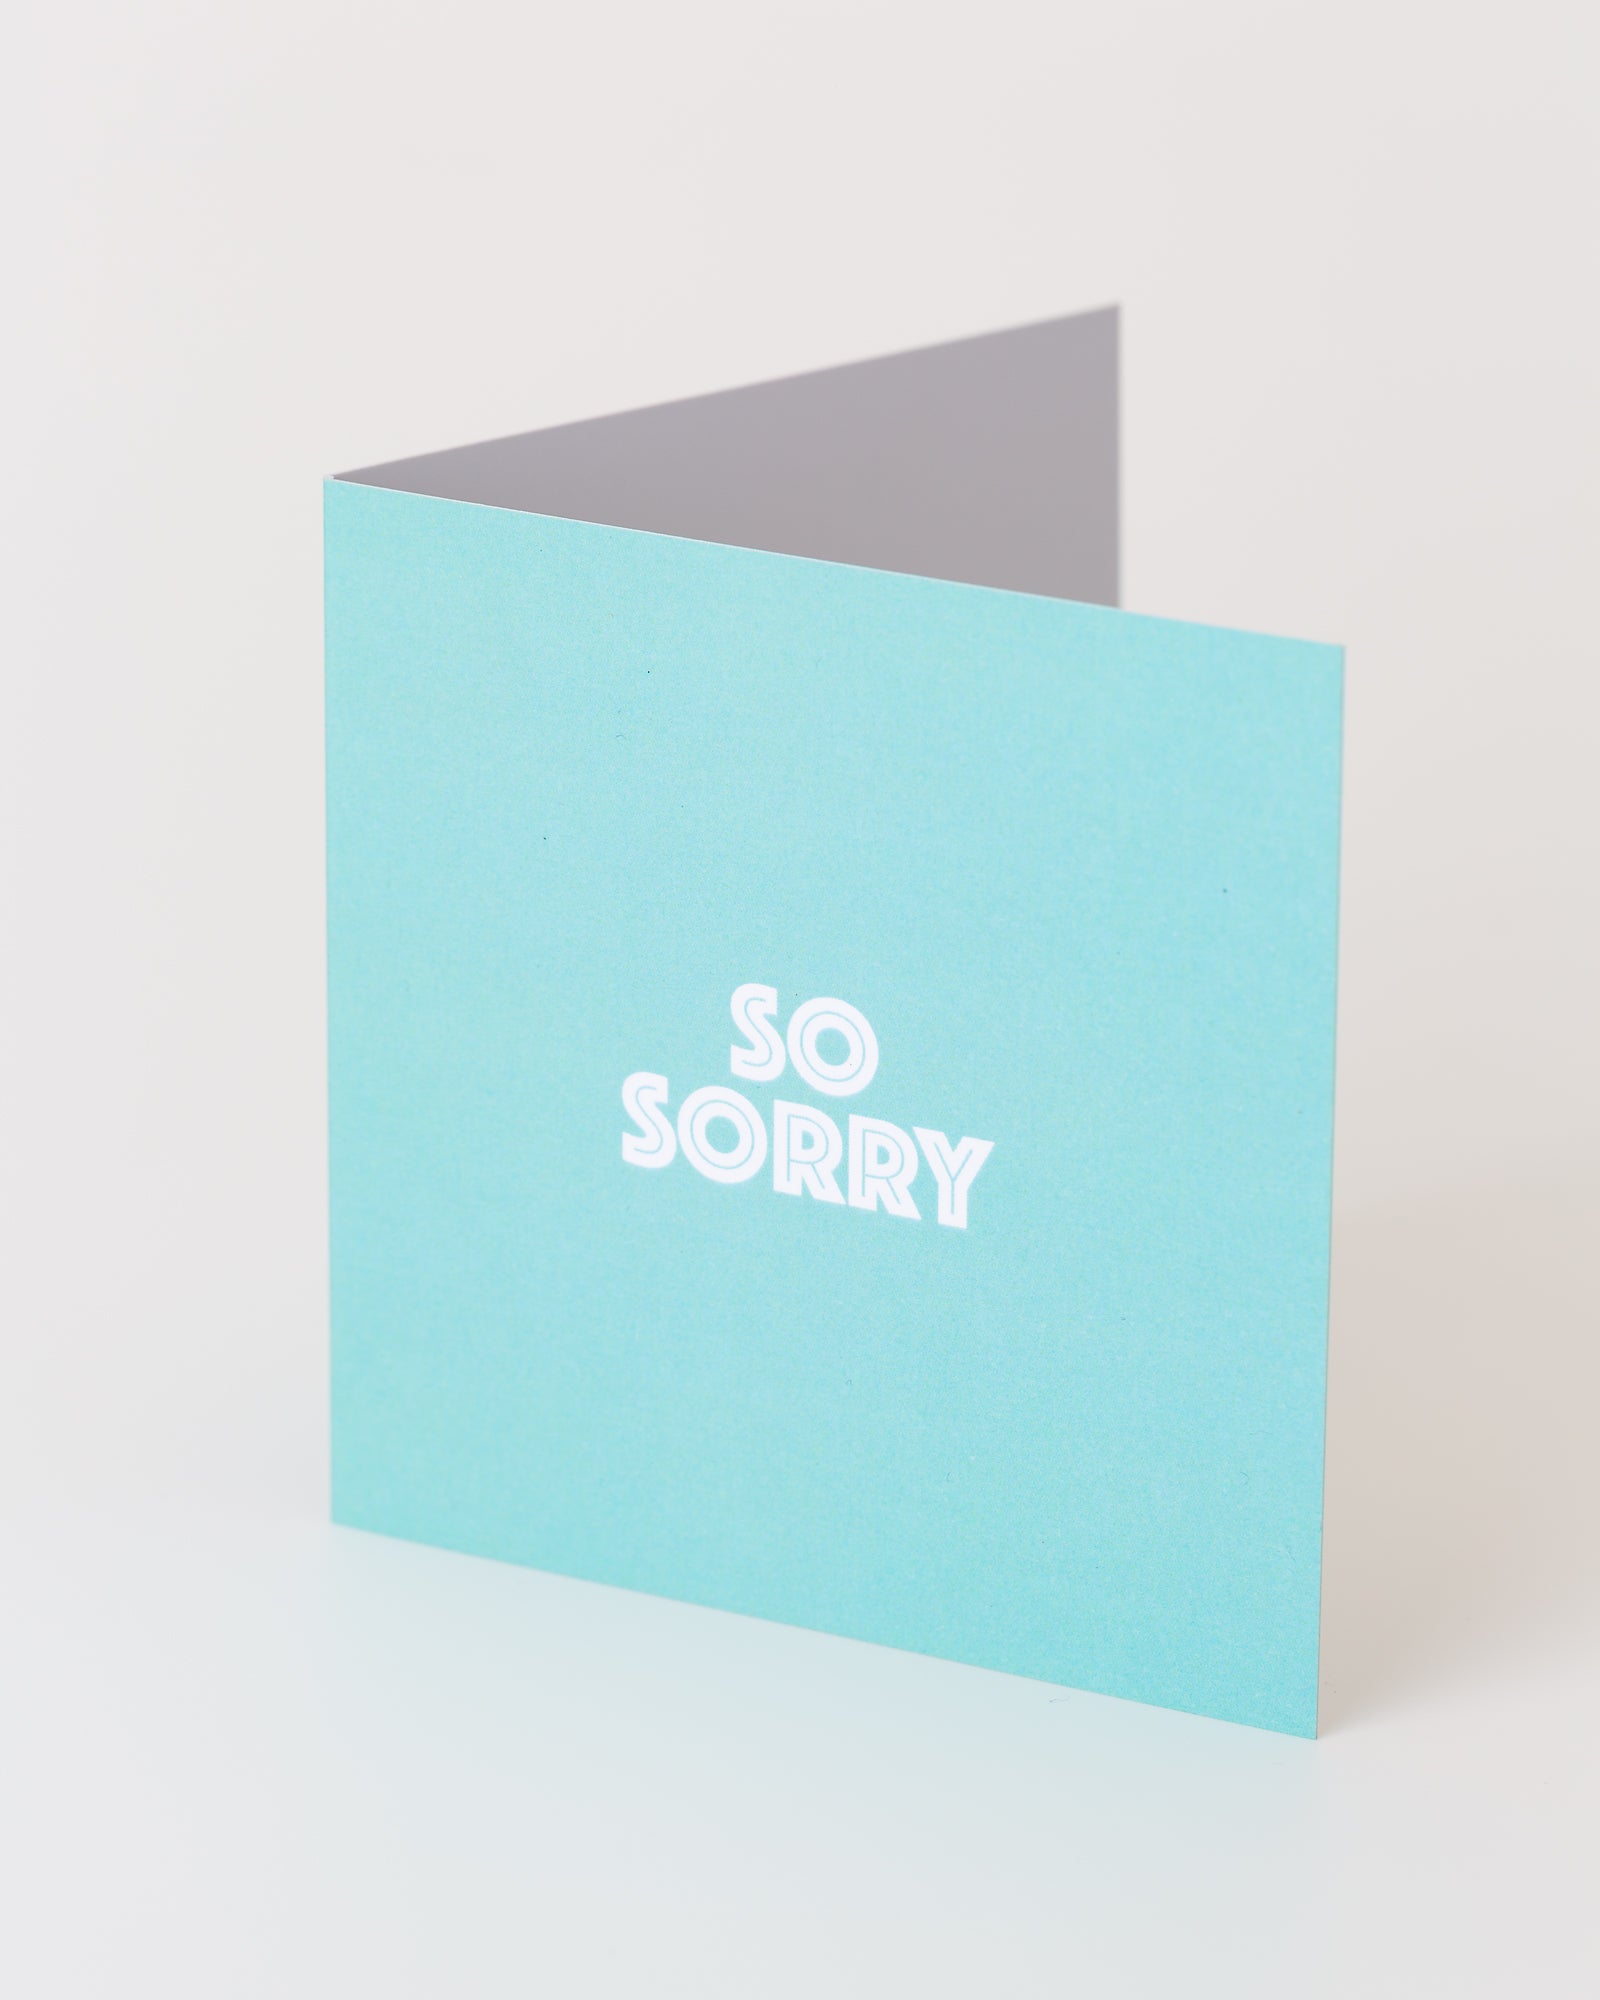 'So sorry' greeting card